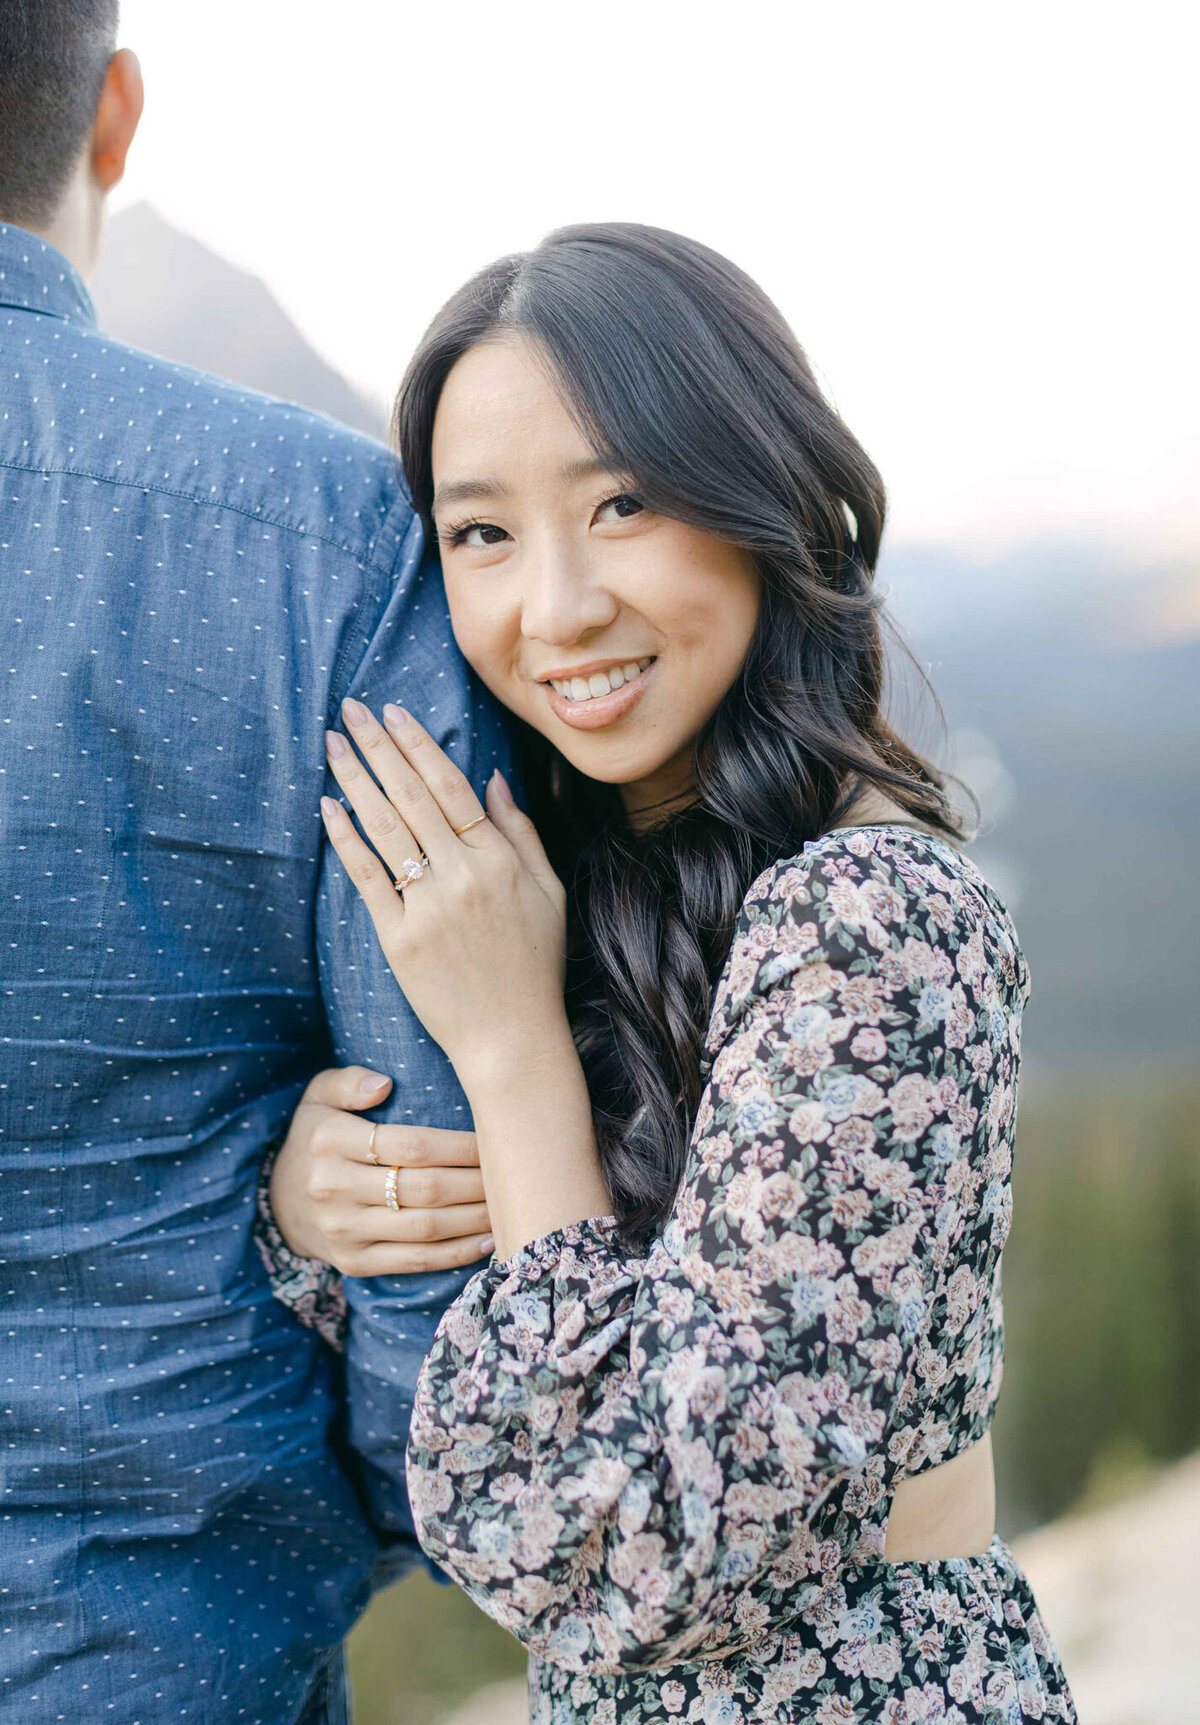 Classic engagement session inspiration by Megan Renee Photography, feminine and romantic wedding photographer in Calgary, Alberta. Featured on the Bronte Bride Vendor Guide.